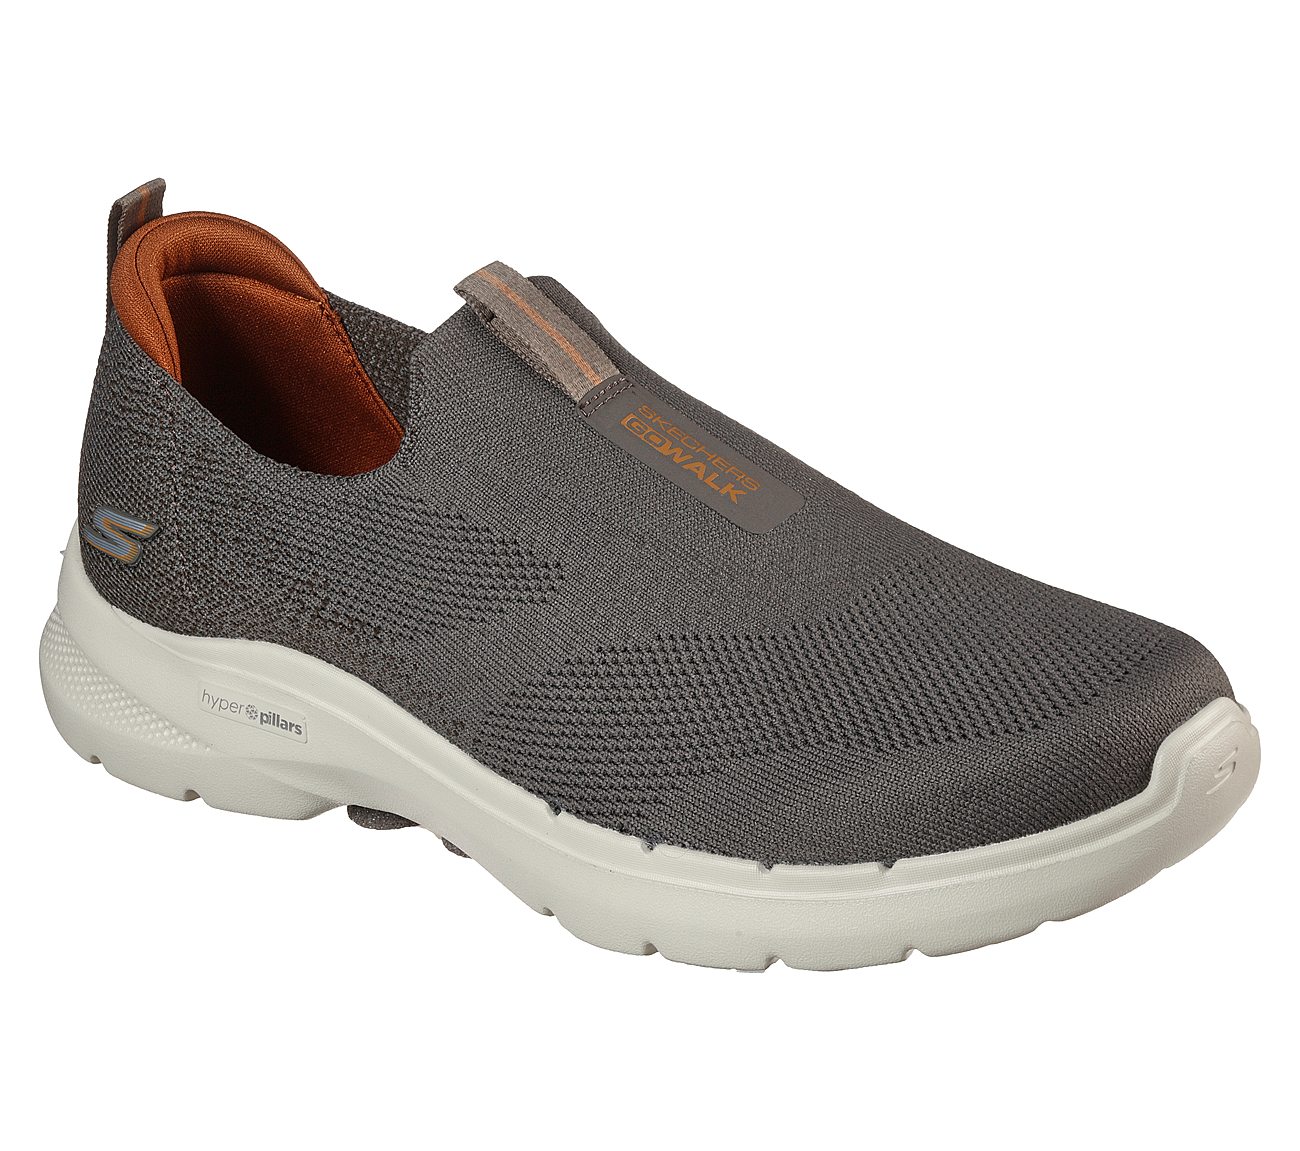 GO WALK 6, TTAUPE Footwear Lateral View